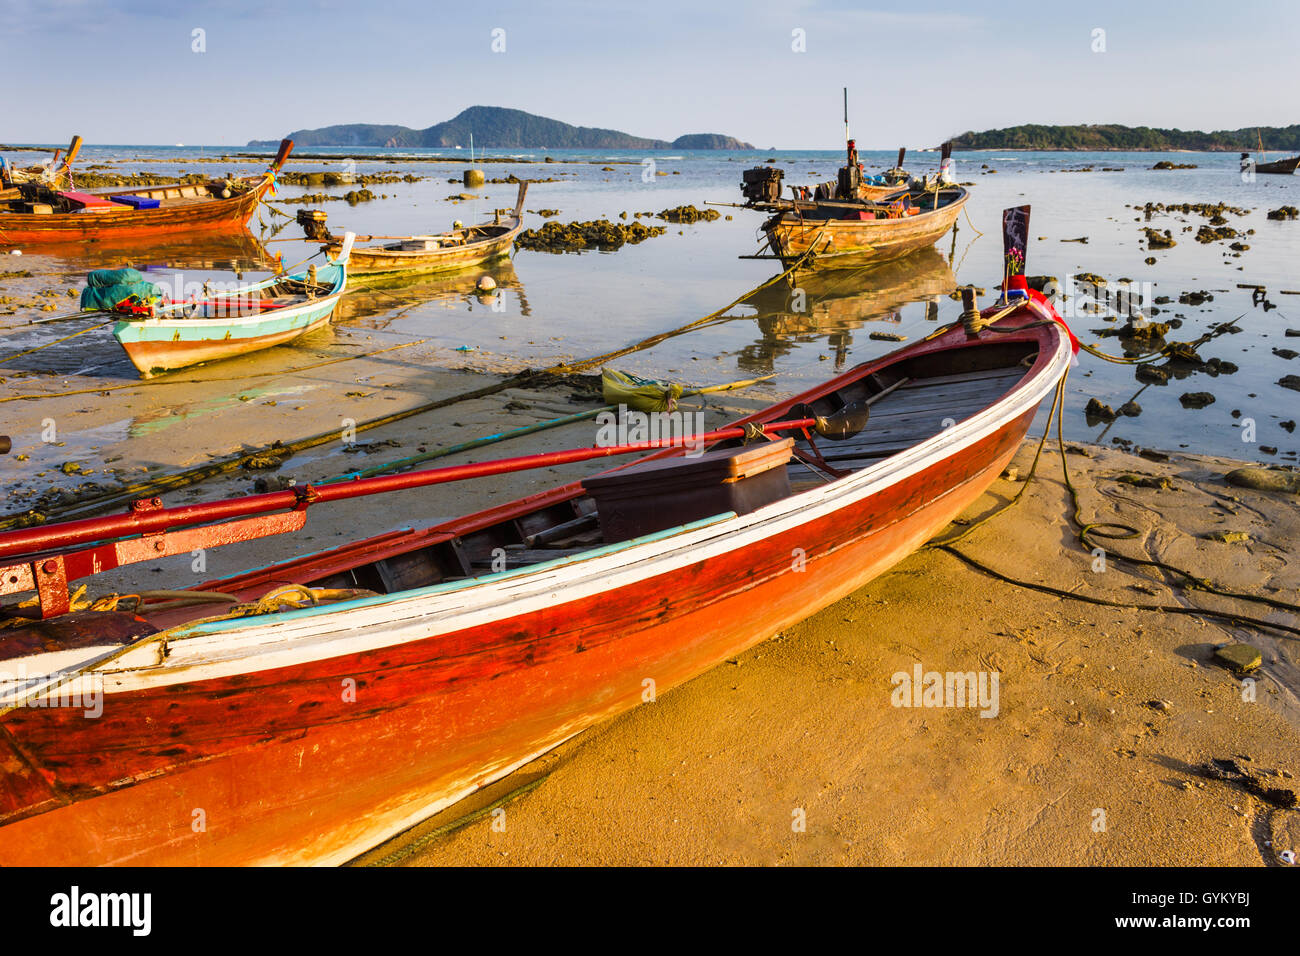 Fishing boats on the sea shore in Thailand Stock Photo